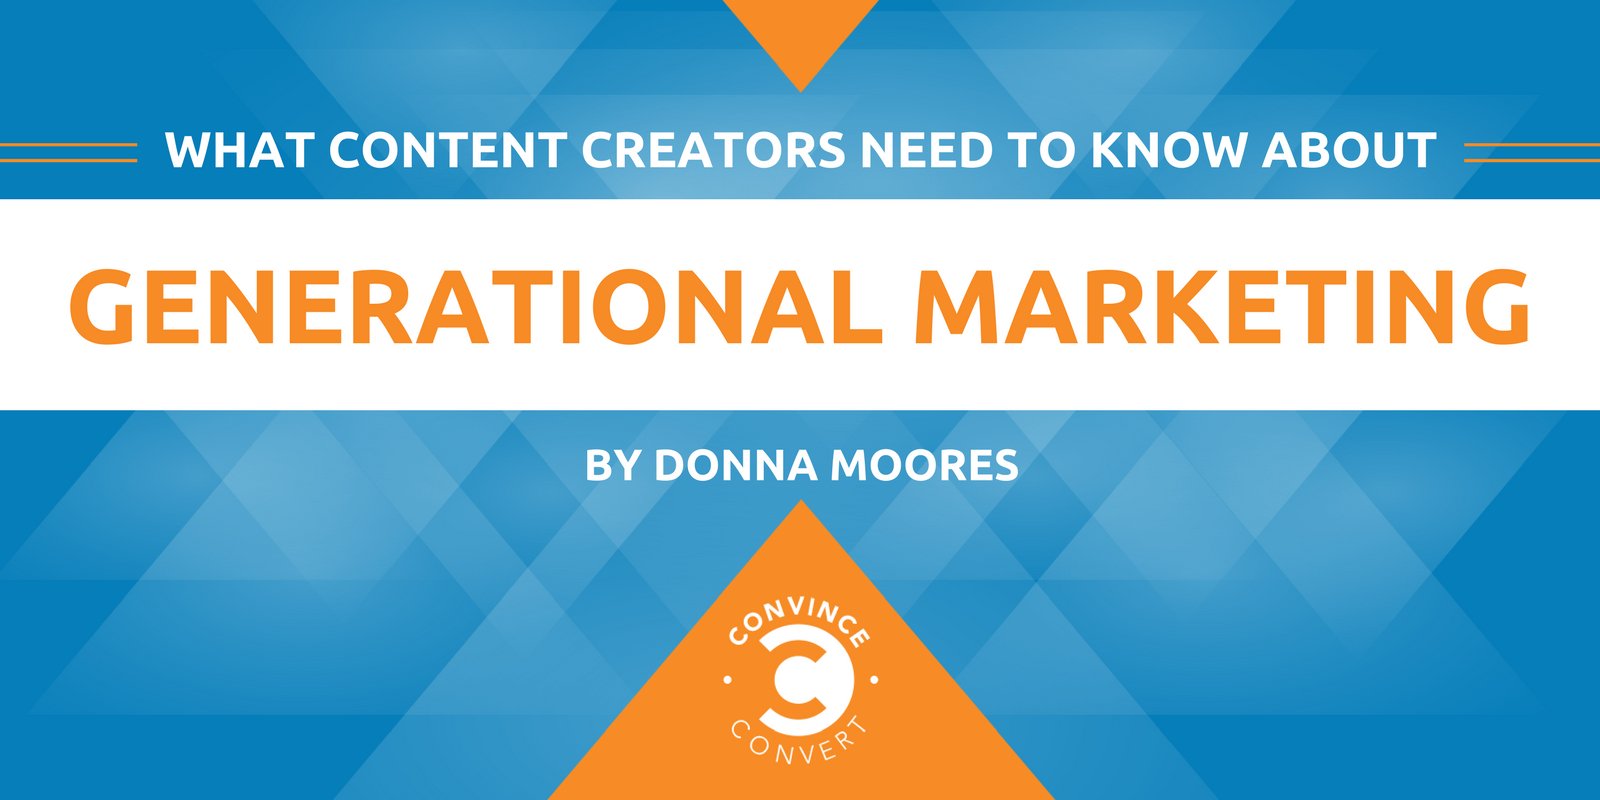 What Content Creators Need to Know About Generational Marketing